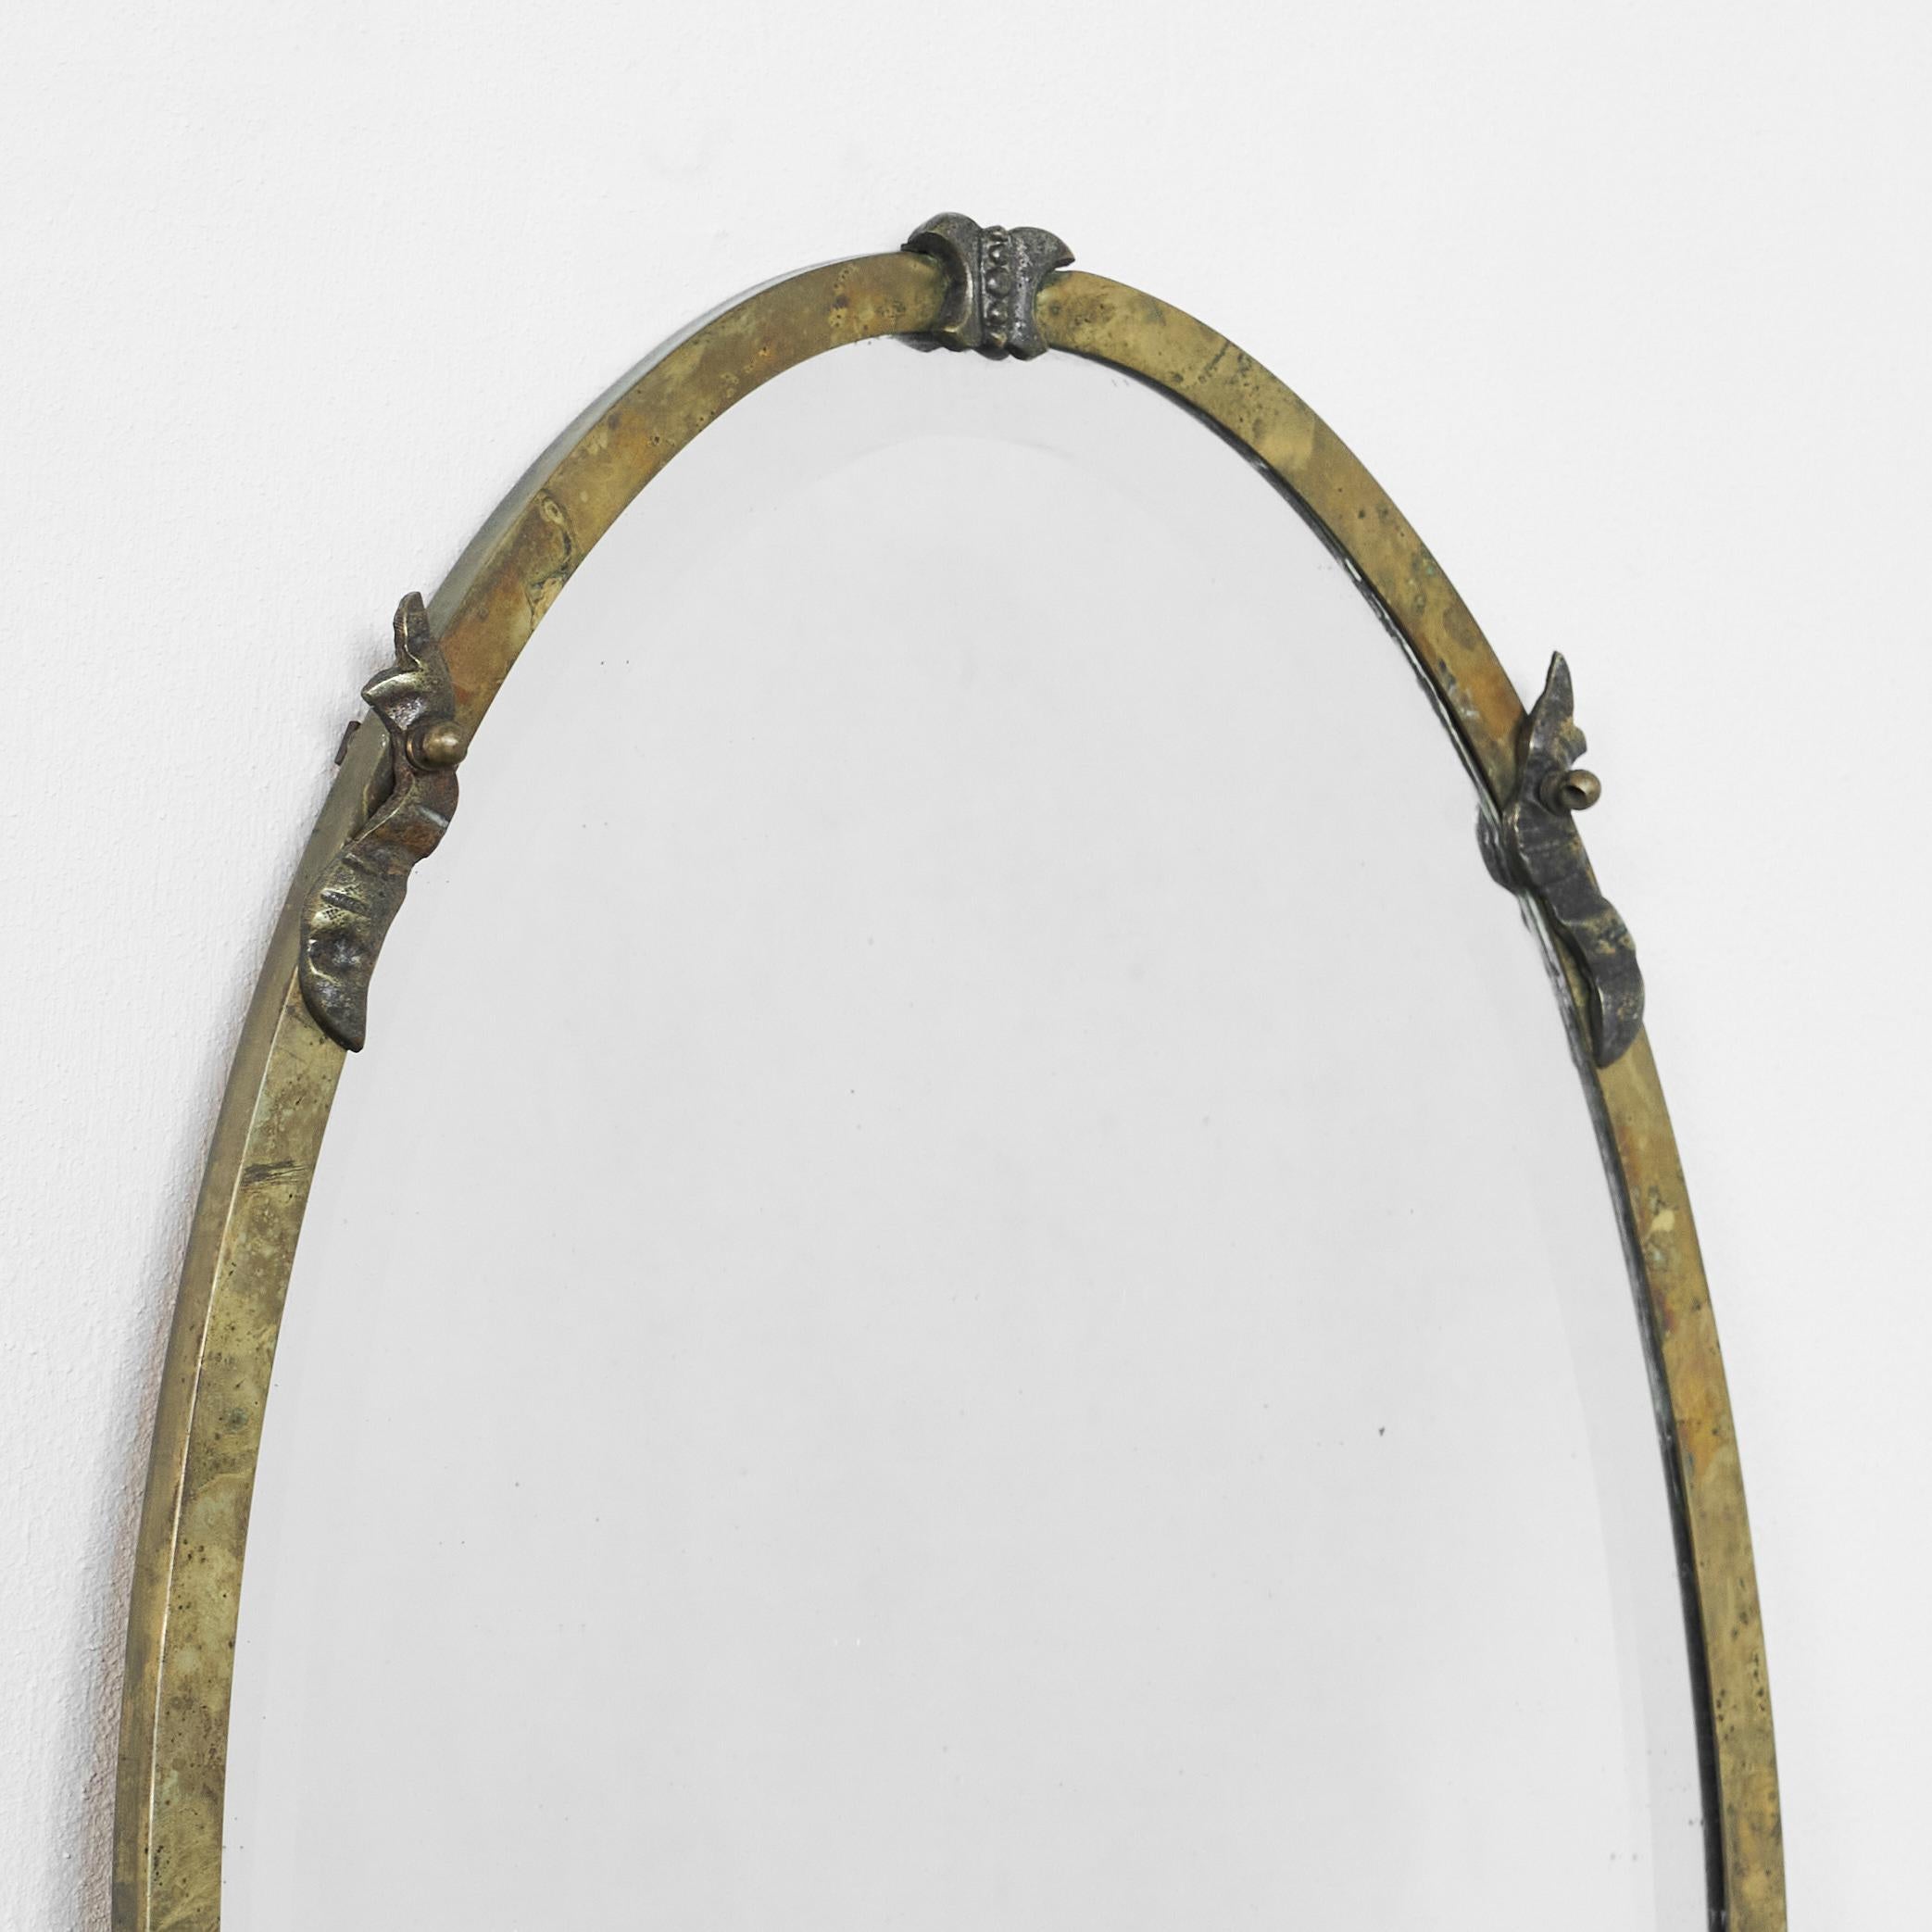 European Oval Art Deco Mirror in Patinated Brass and Beveled Glass 1930s